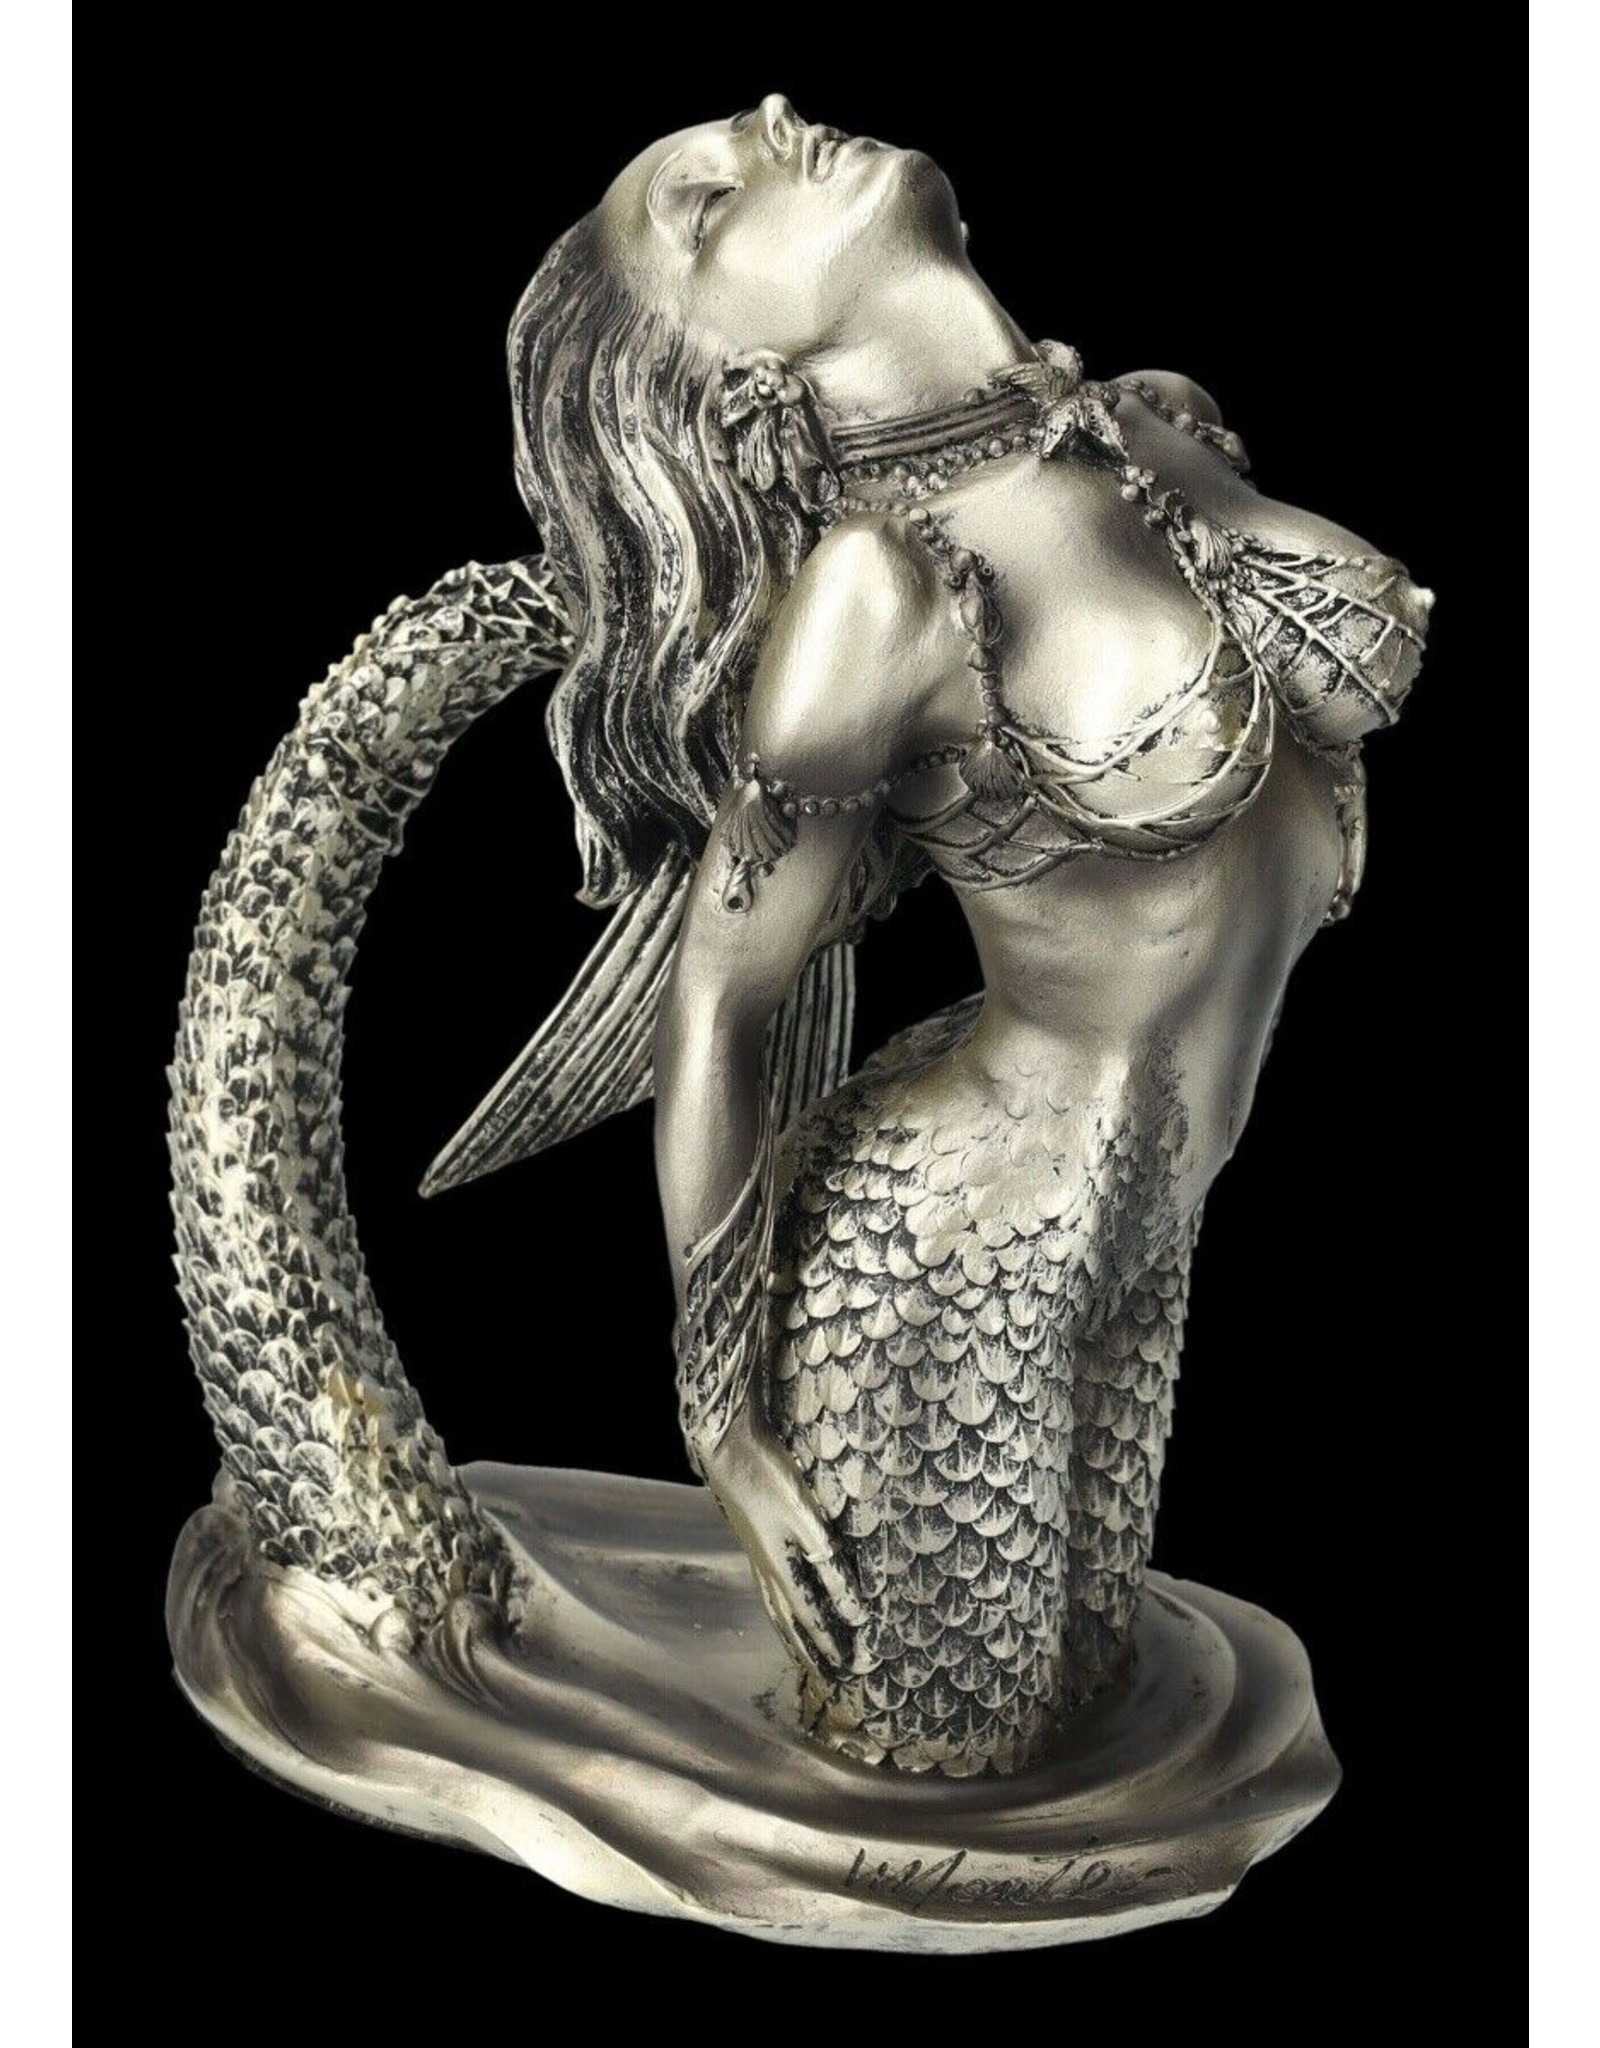 Veronese Design Giftware & Lifestyle - Monte M. Moore Mermaid rising out of the water, Veronese Design